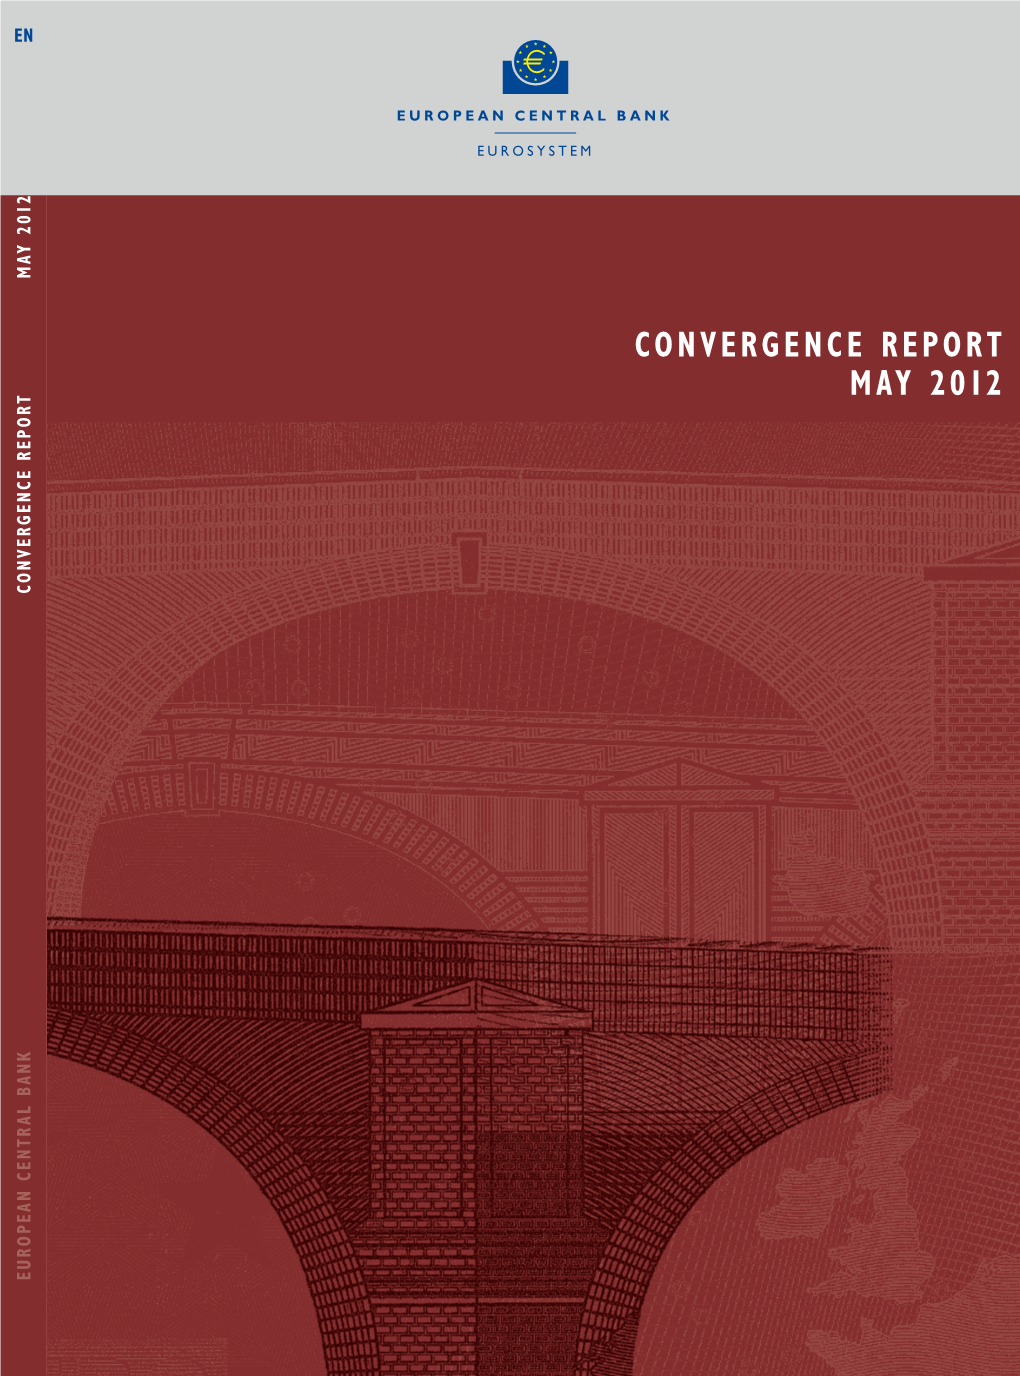 Convergence Report, May 2012